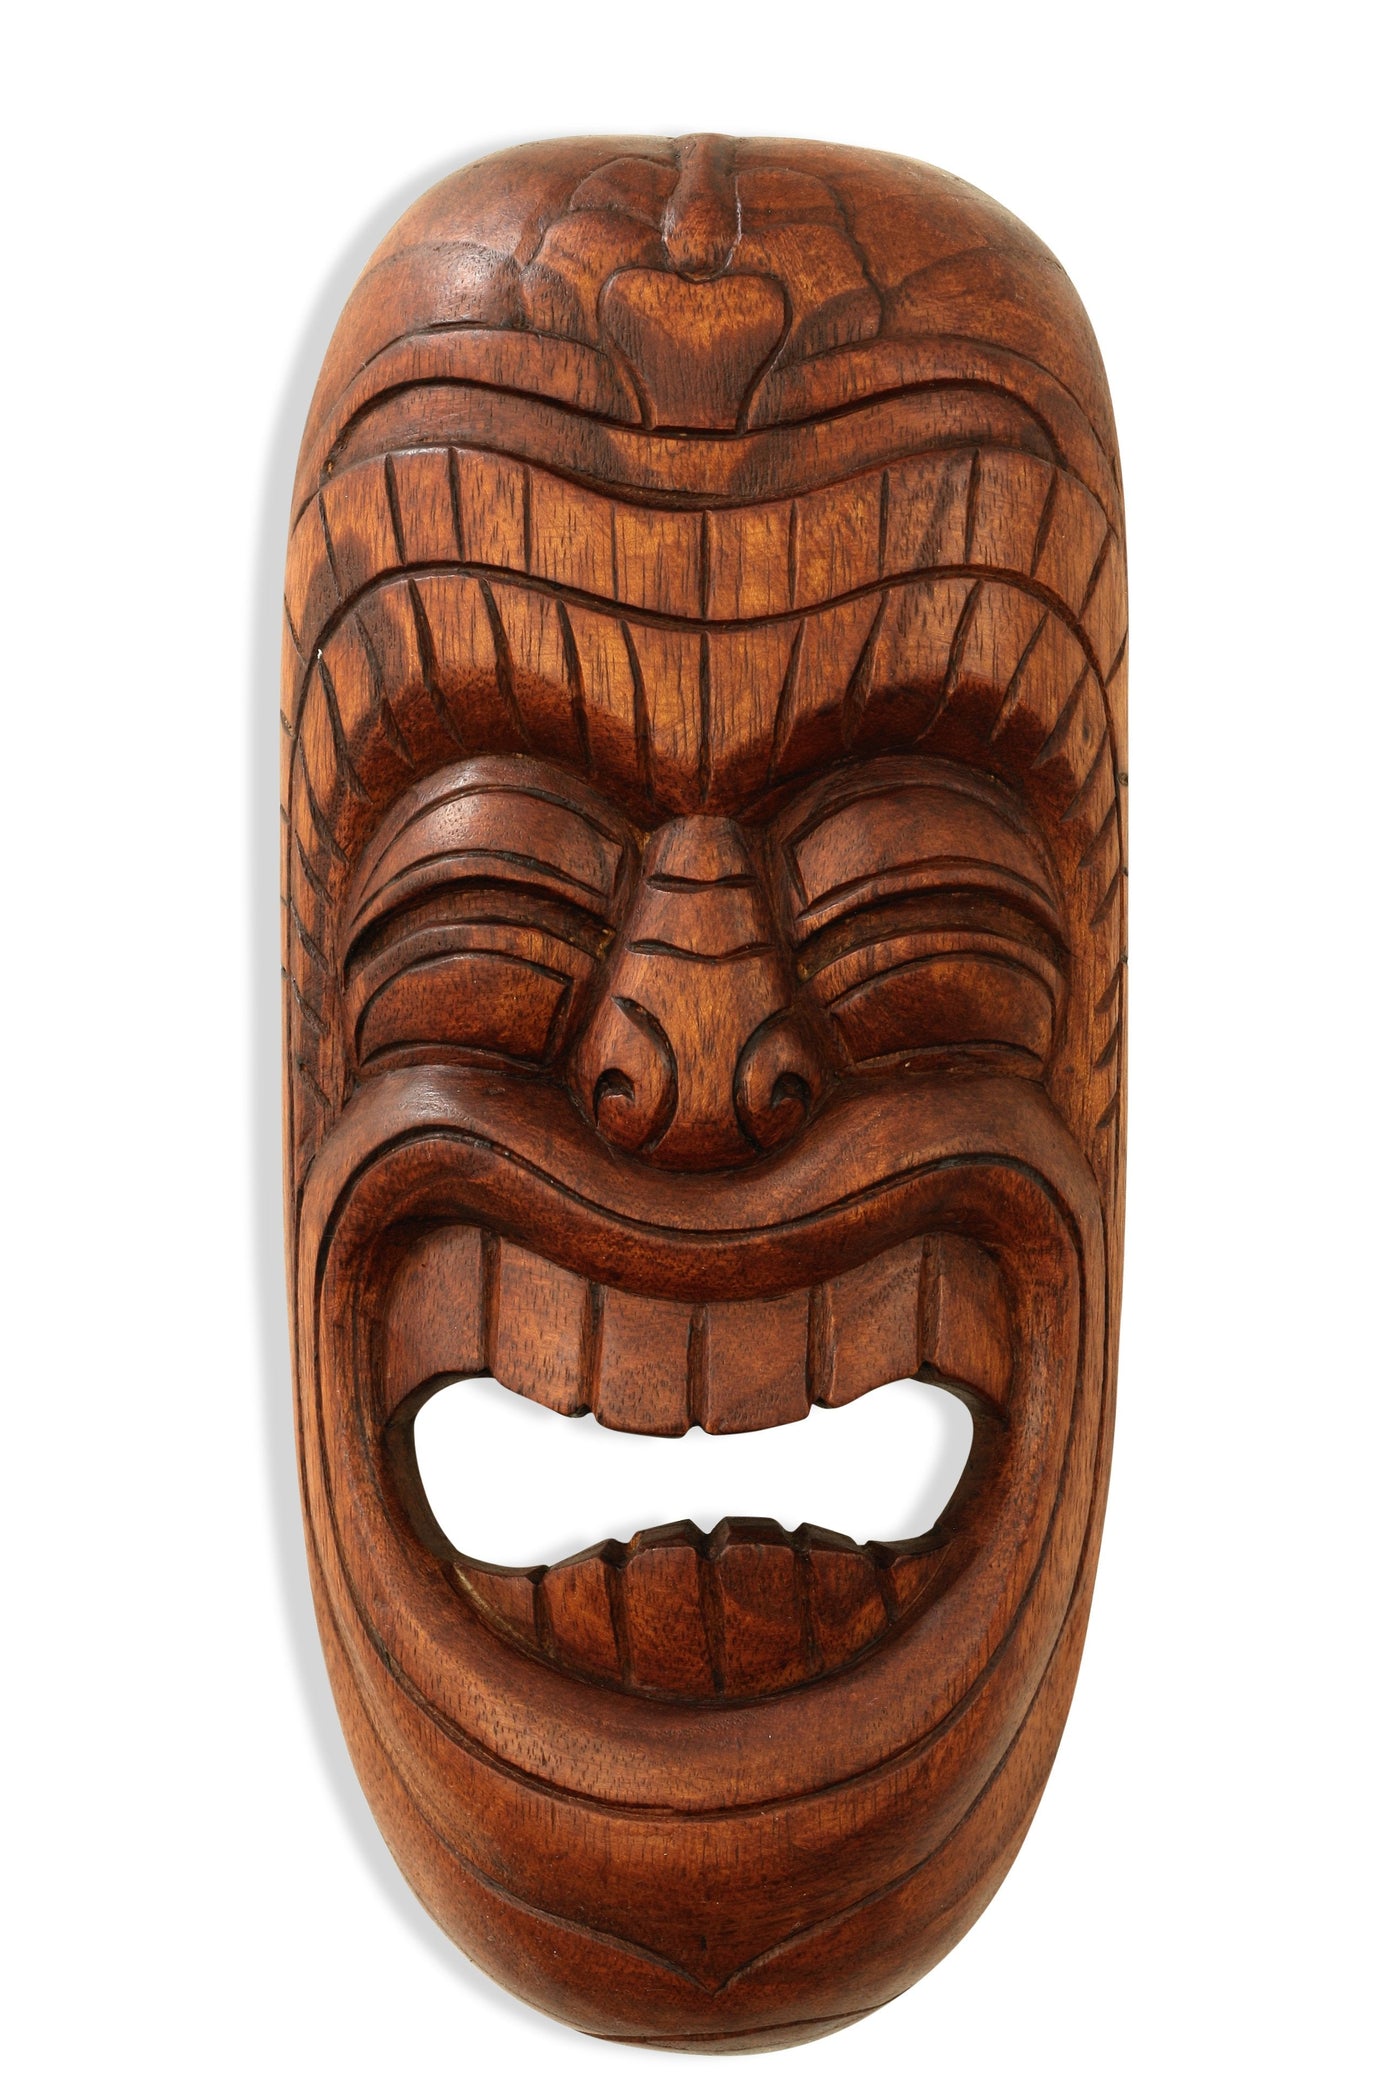 Wooden Tribal African Laughing Mask Hand Carved Wall Plaque Hanging Home Decor Accent Art Unique Sculpture Decoration Handmade Handcrafted Decorative